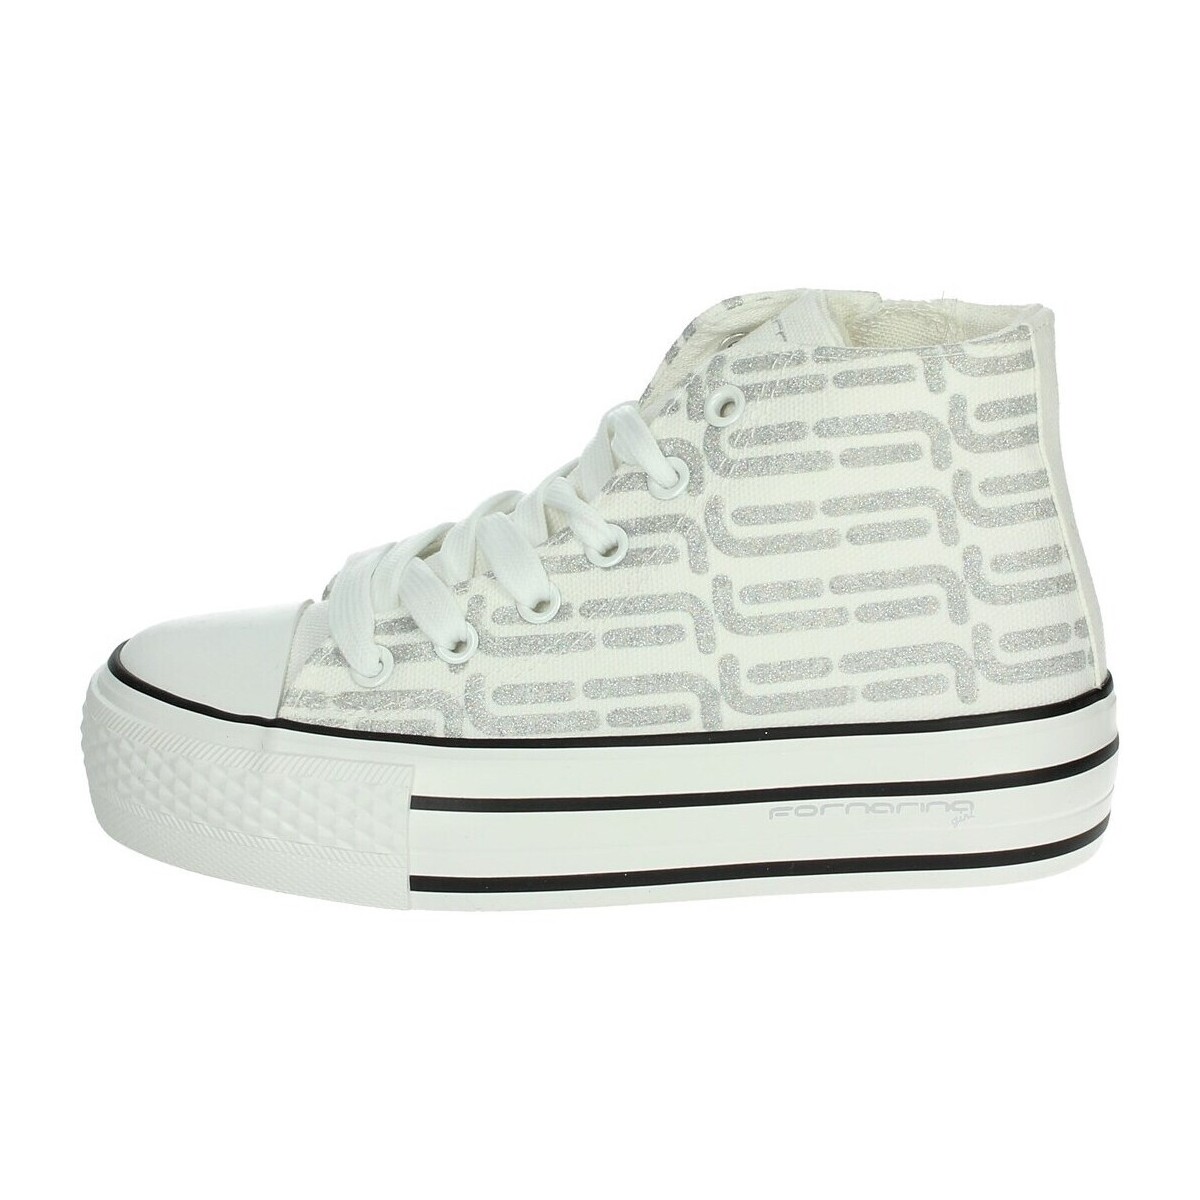 Chaussures Fille Baskets basses Fornarina BARBI Blanc